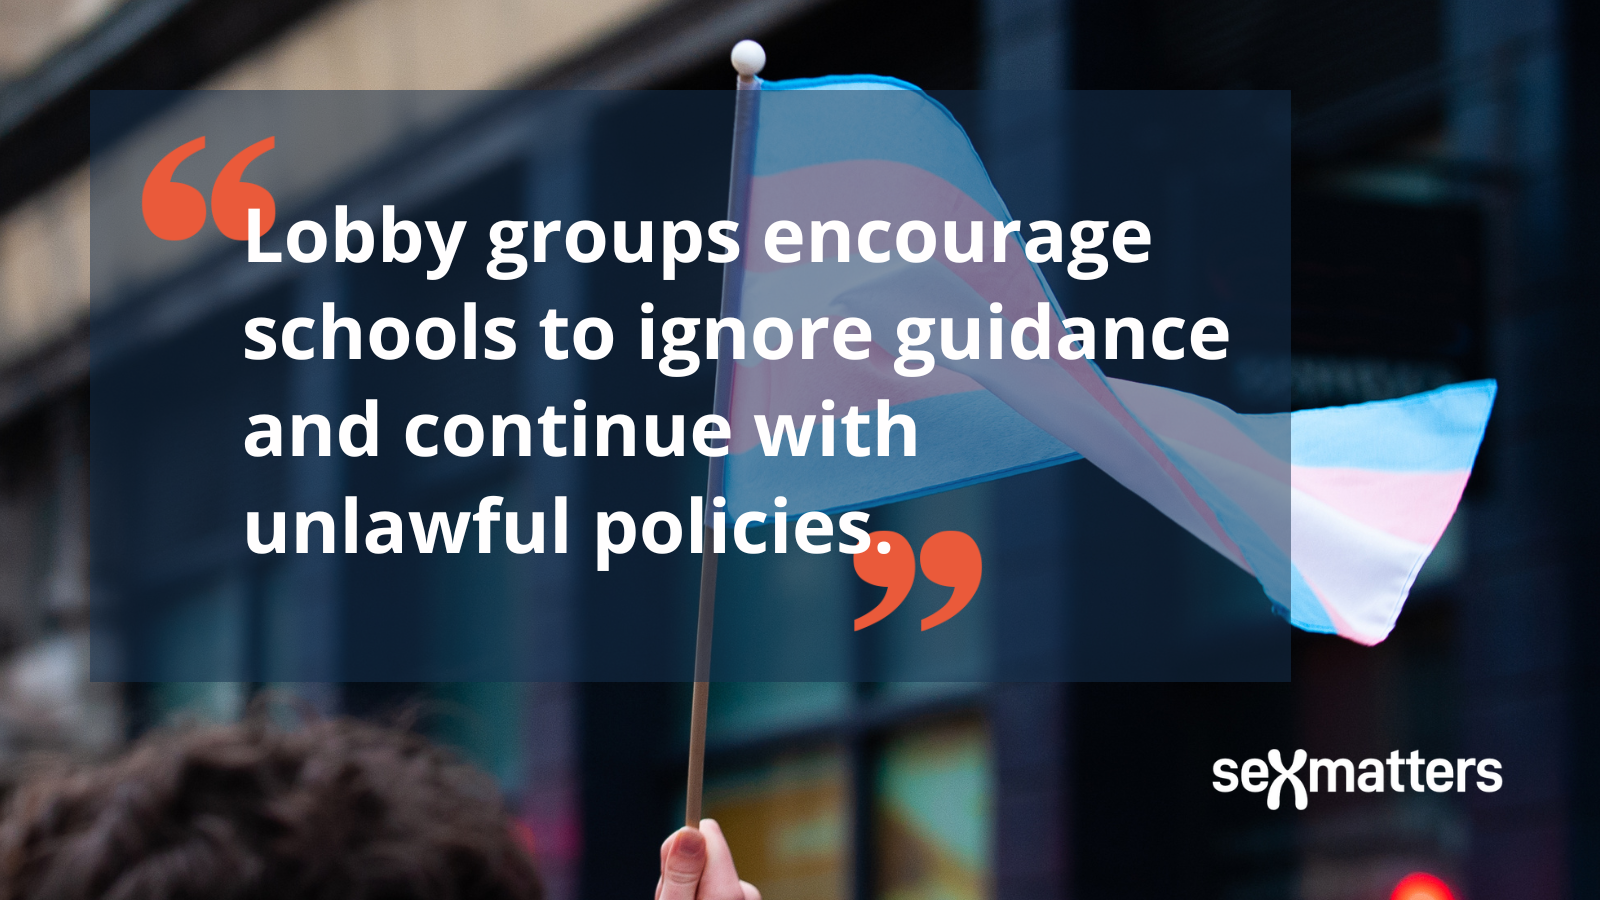 Lobby groups encourage schools to ignore guidance and continue with unlawful policies.